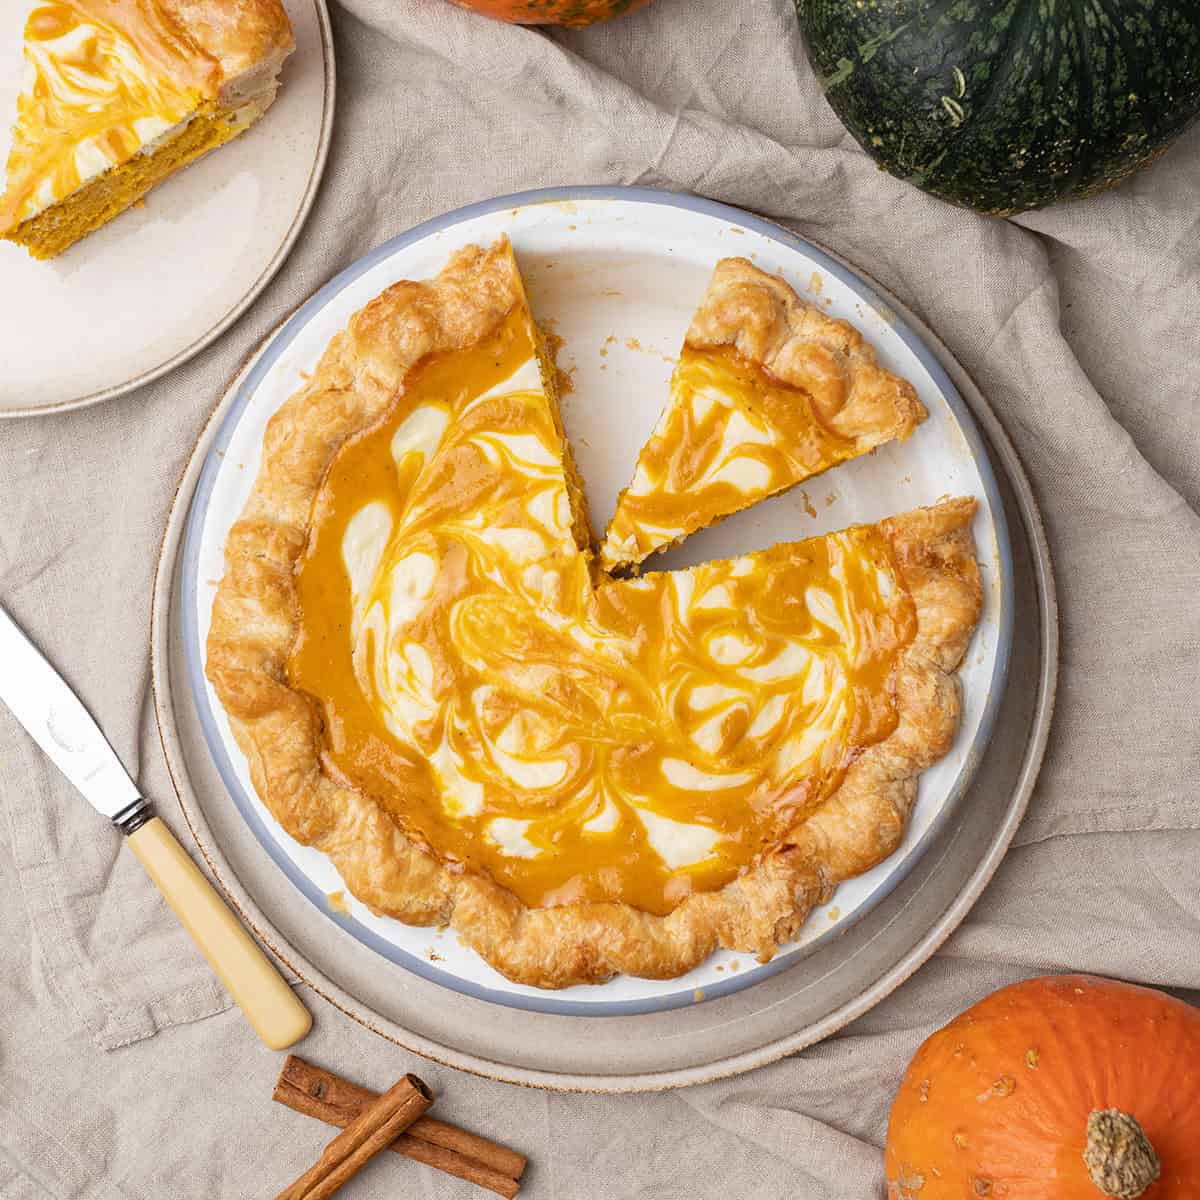 <p>This pie will be a unique addition to your next Fall or Thanksgiving gathering. The flaky pie crust provides a contrasting texture to the smooth and silky pumpkin filling. Not overly sweet, this pie offers a balance of savory flavors with a hint of sweetness from the cream cheese marbling. </p> <p><strong>Go to the recipe: <a href="https://www.spatuladesserts.com/pumpkin-cream-cheese-pie/">Pumpkin Cream Cheese Pie</a></strong></p>